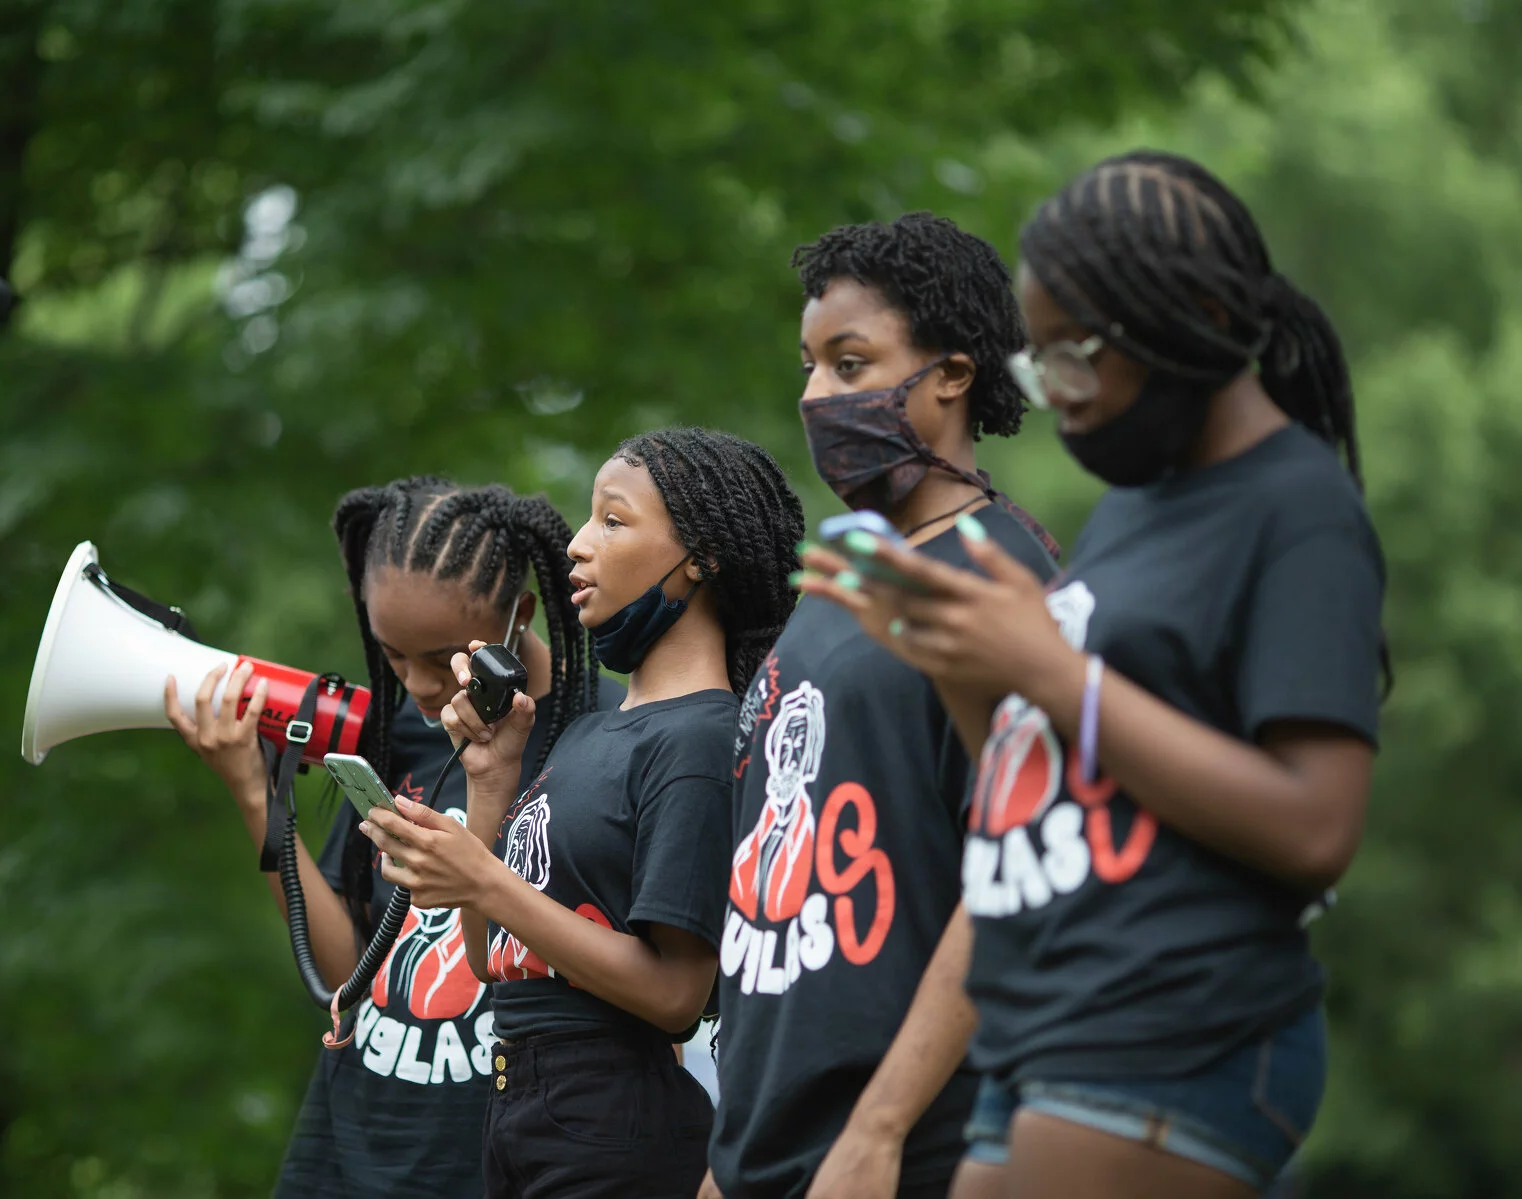 A row of four young Black adults wearing the same t-shirt. One person holds a megaphone while another speaks into its attached microphone.